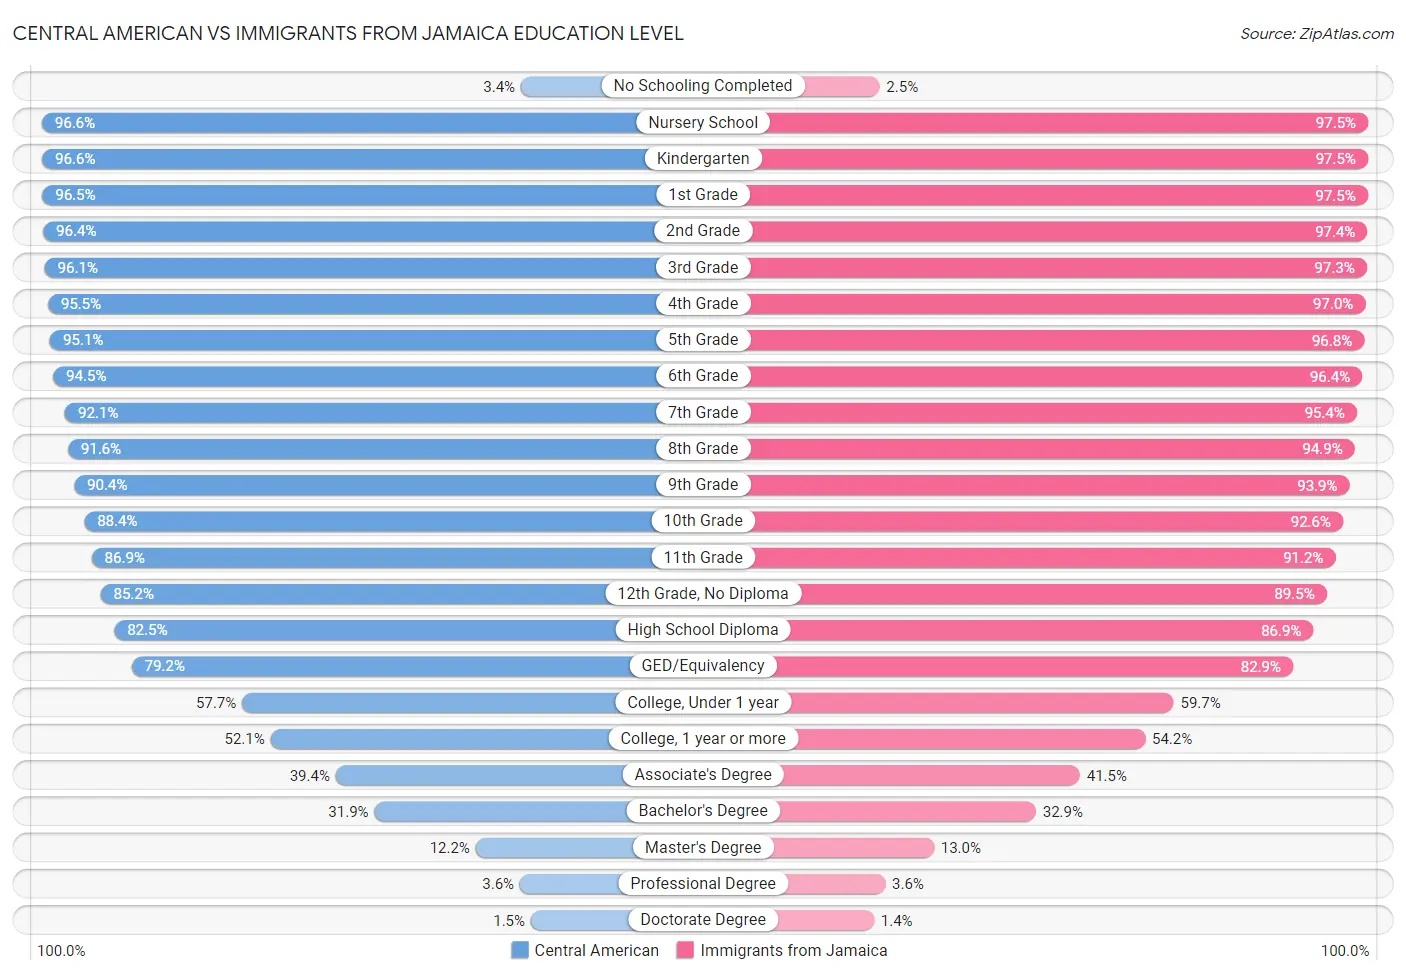 Central American vs Immigrants from Jamaica Education Level